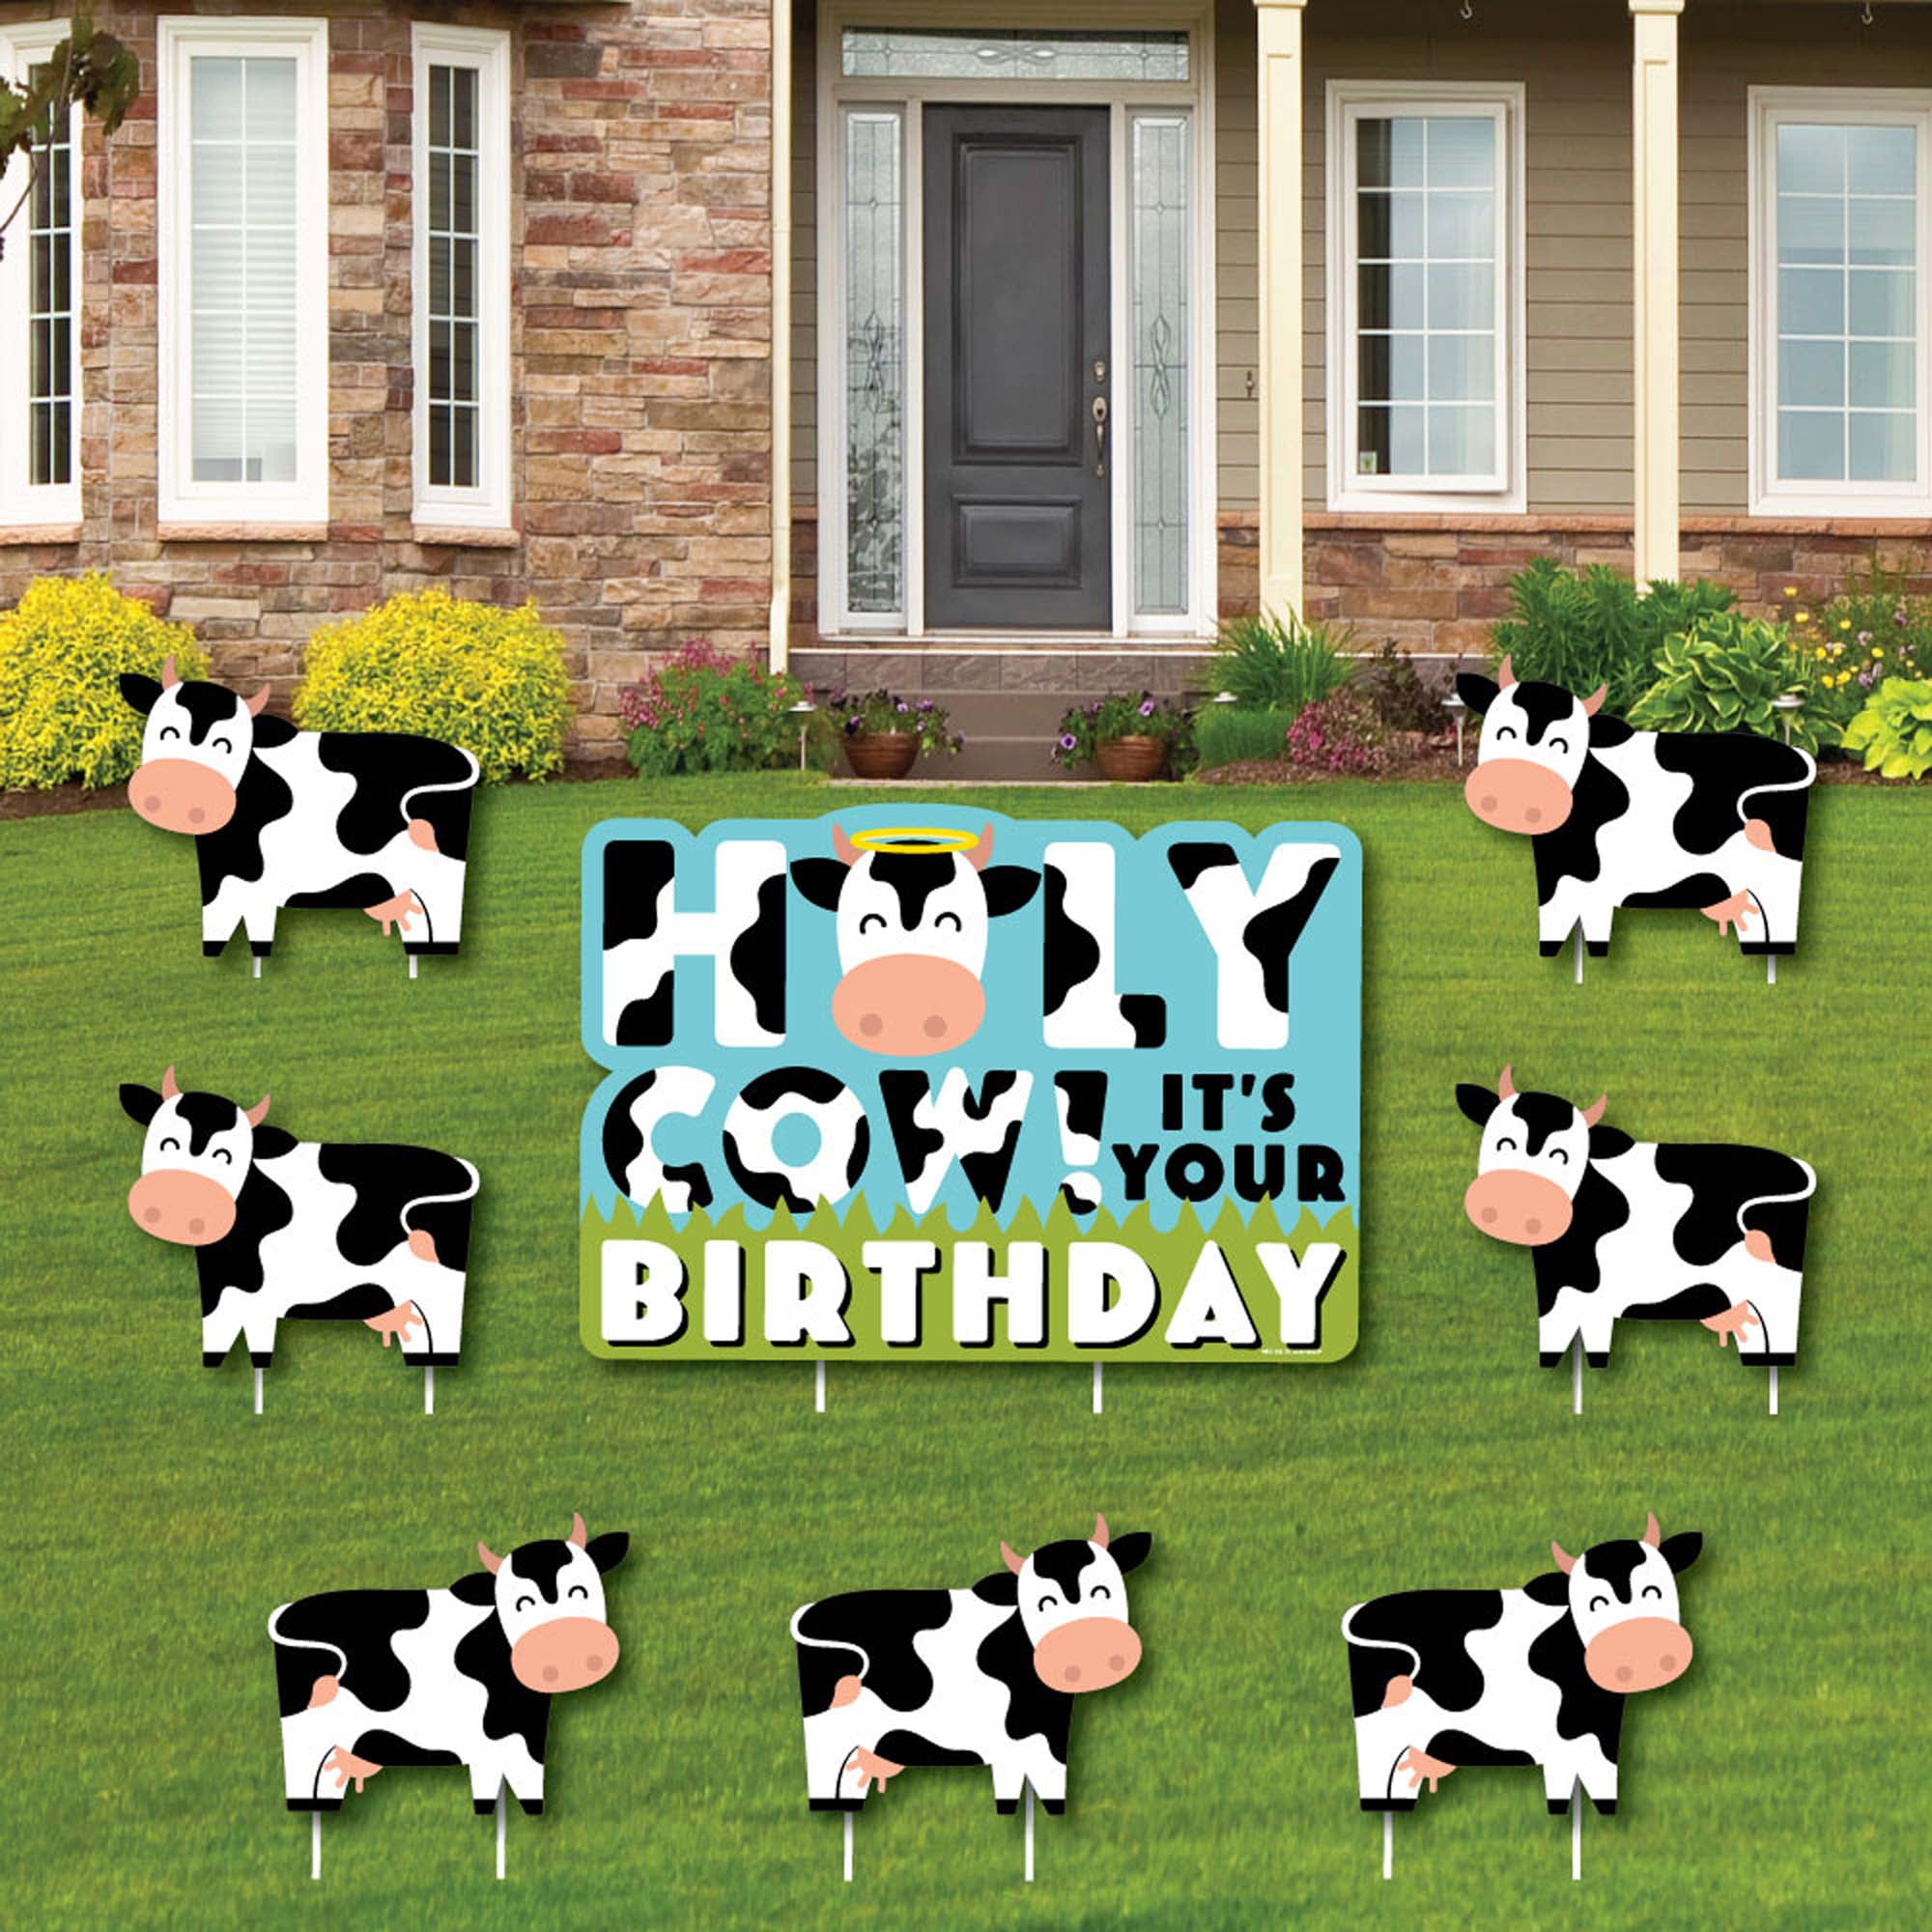 Details about   Luciole Happy Birthday Yard Sign with Stakes Set of 13 Large Lawn Letters and 